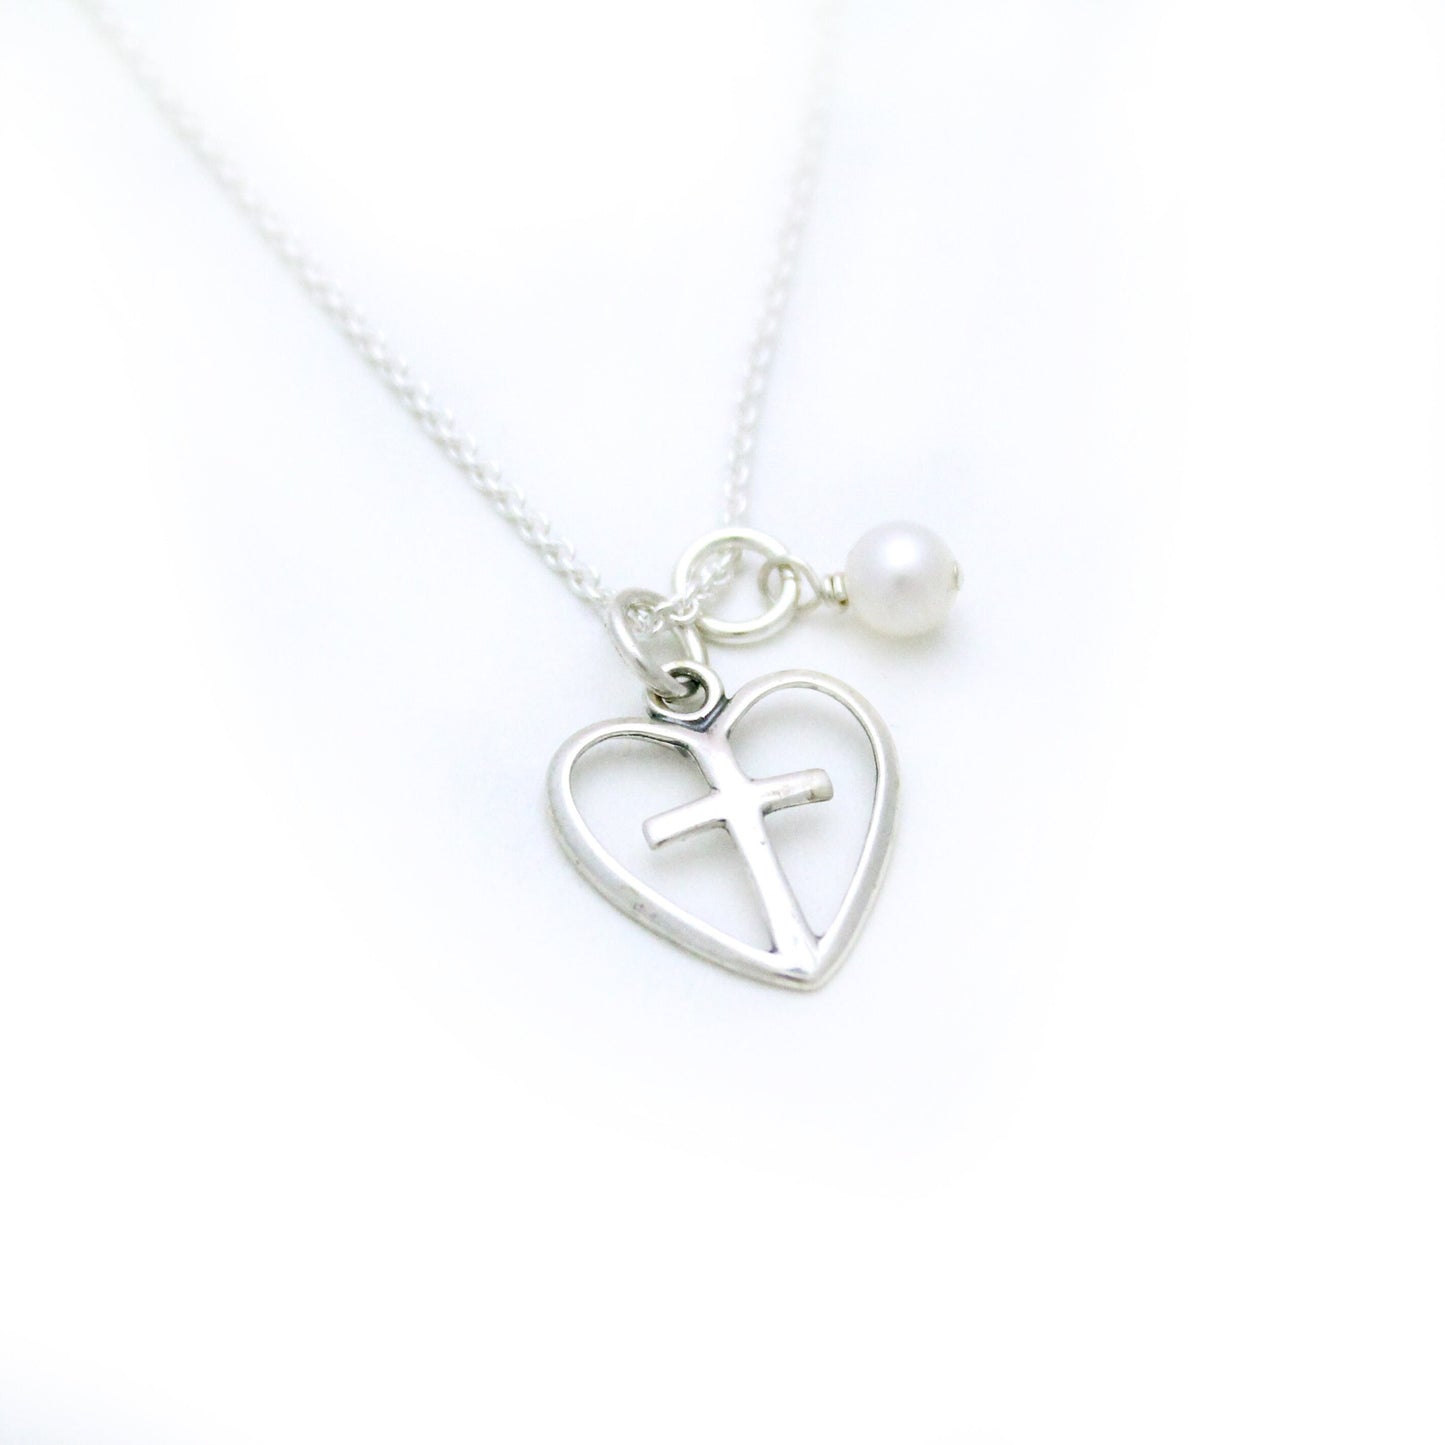 Heart Cross Necklace with Birthstone or Pearl - First Confirmation Gift - Holy Communion Jewelry - Girl's Cross Necklace - Gift for Baptism